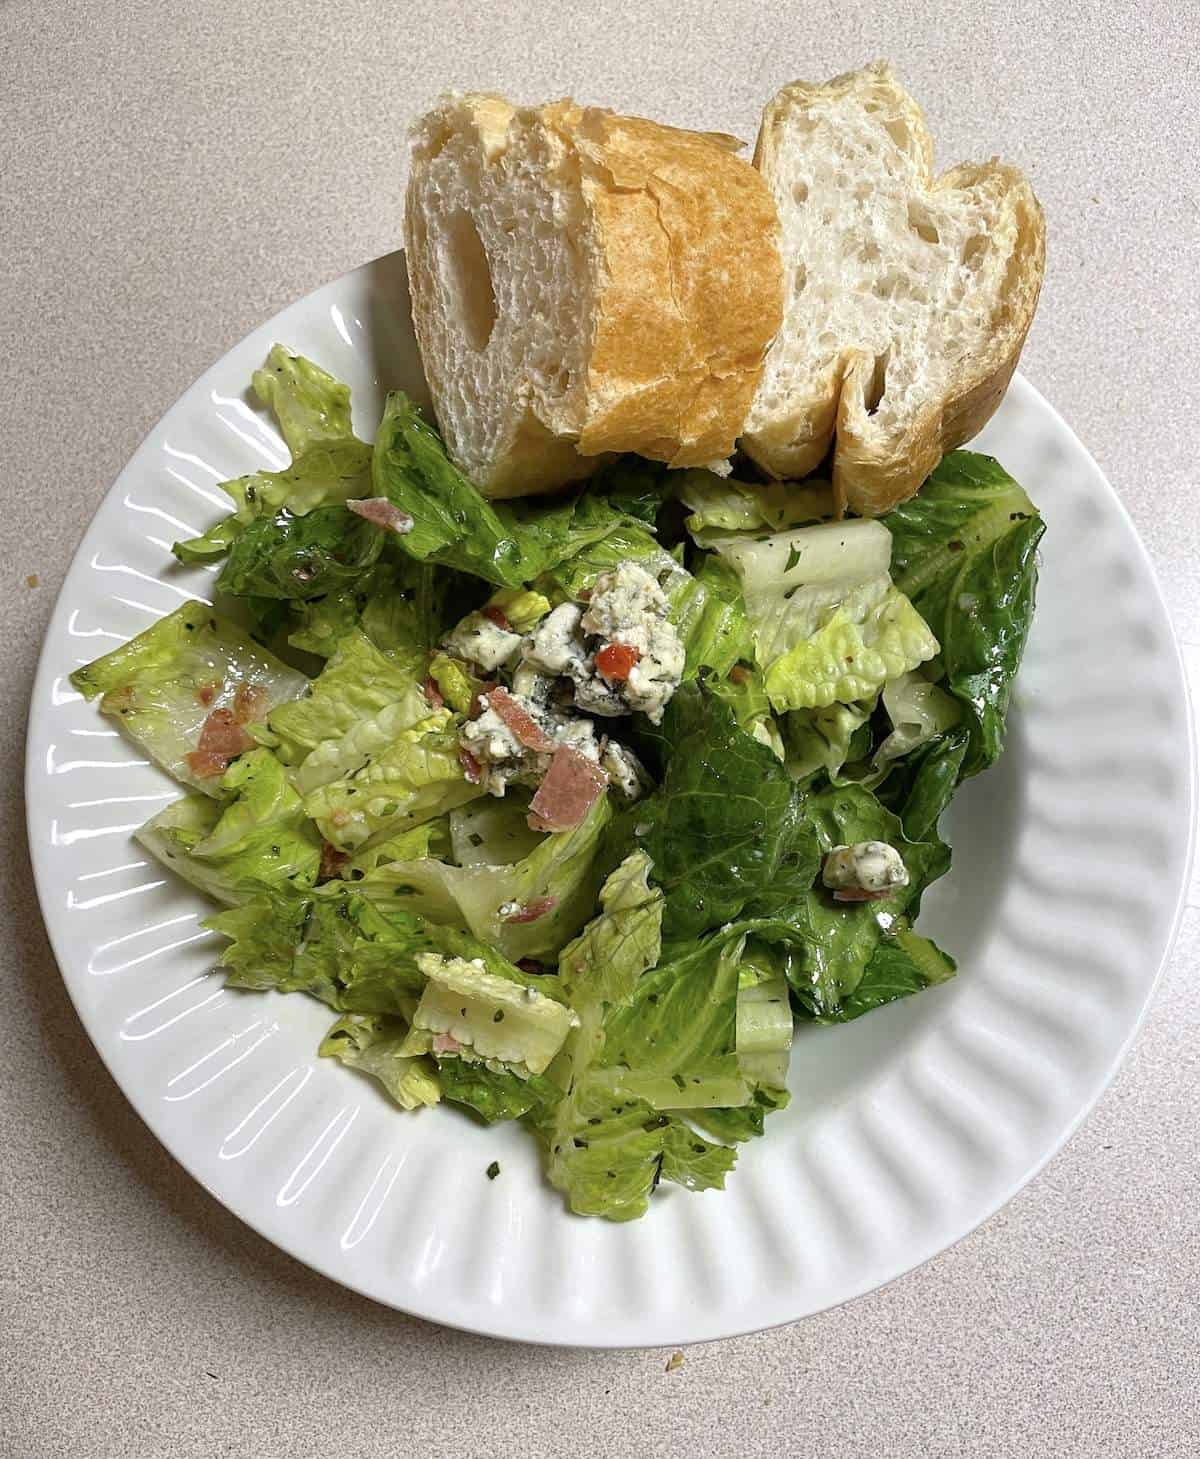 A bowl of royal street salad and two slices of french bread.